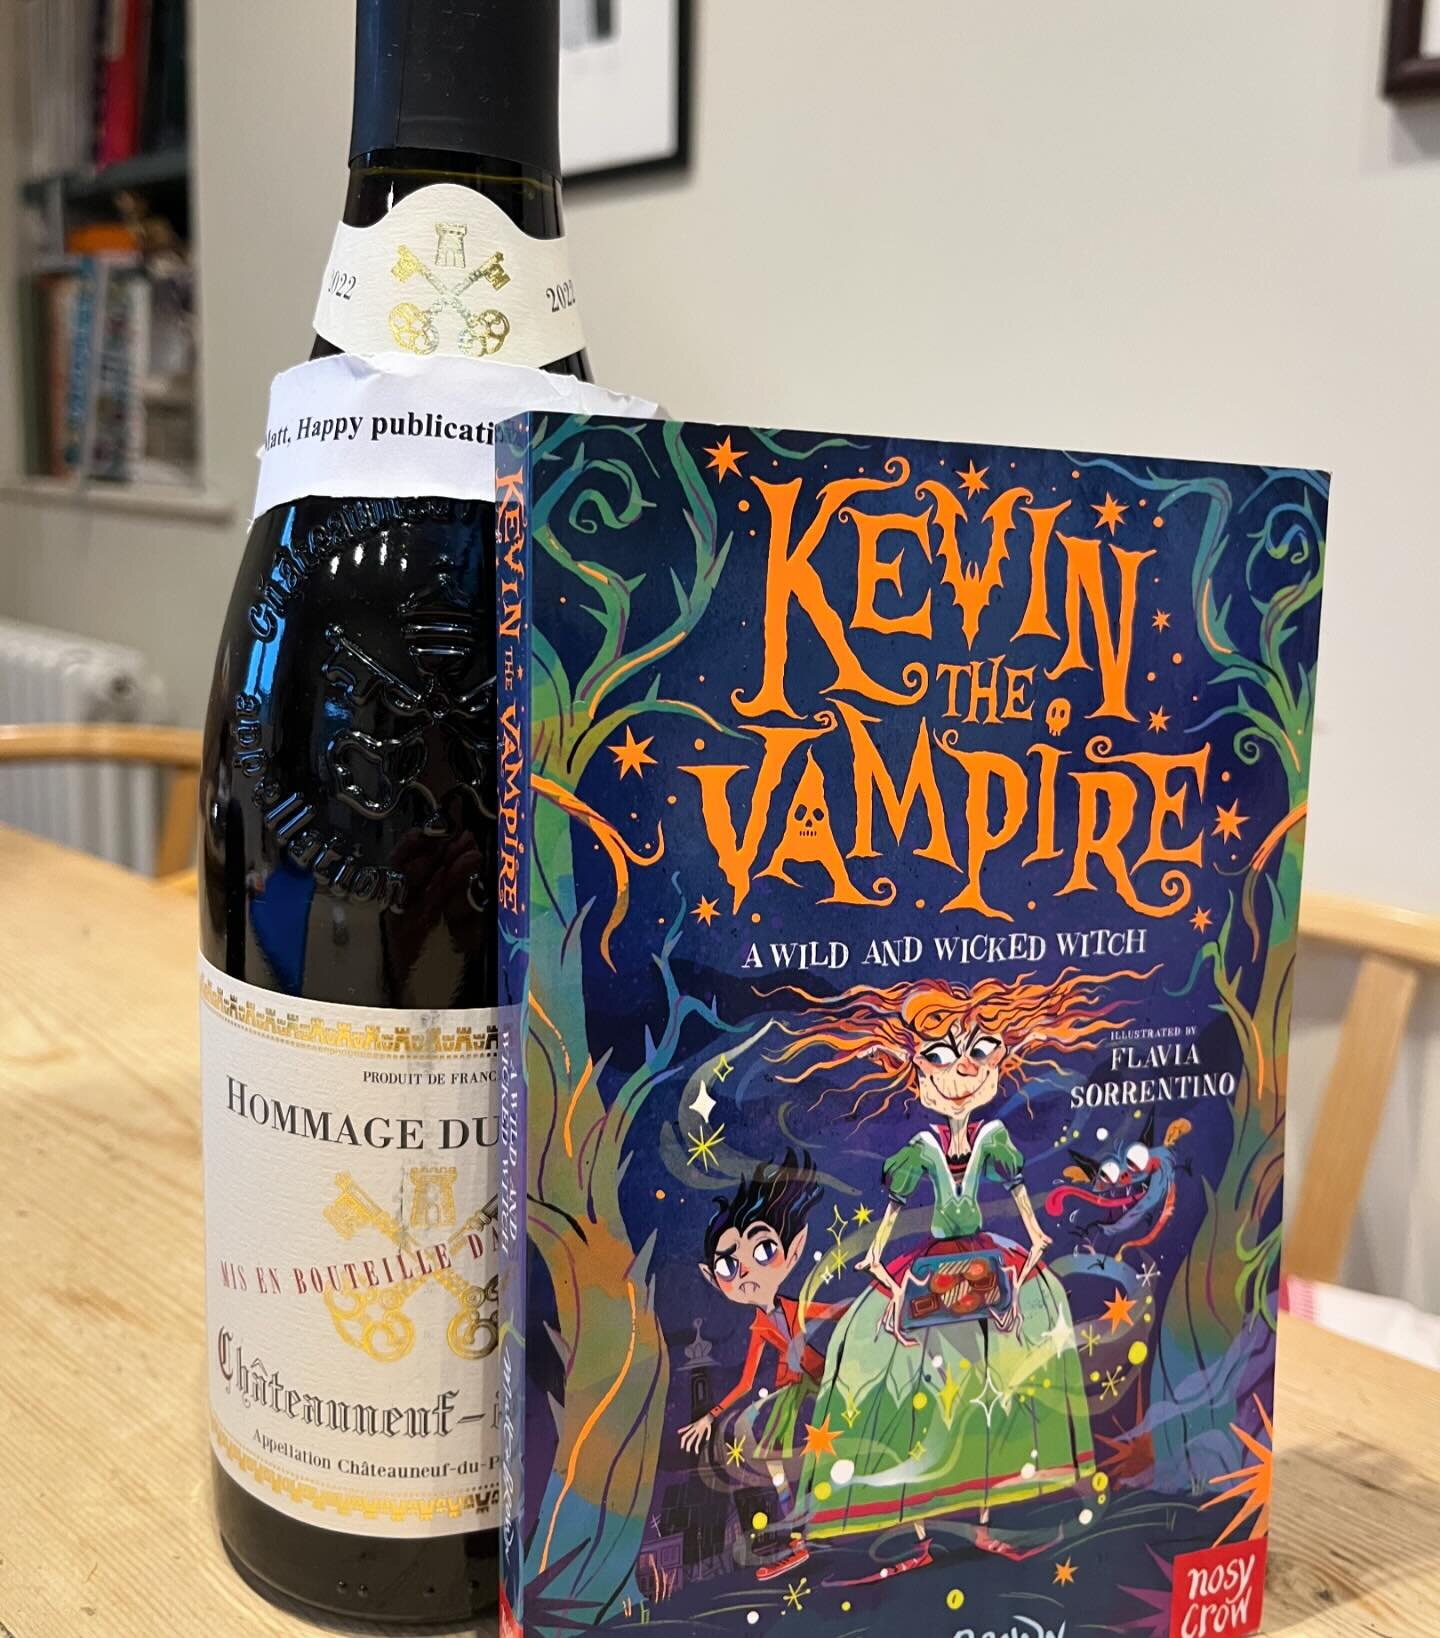 THANK YOU THANK YOU @nosycrow for my delicious looking publication day pressie. Have I mentioned that KEVIN THE VAMPIRE: A WILD AND WICKED WITCH is being published TODAY? You can get a copy in your favourite bookshop. Also, for all you Wordle fans, h